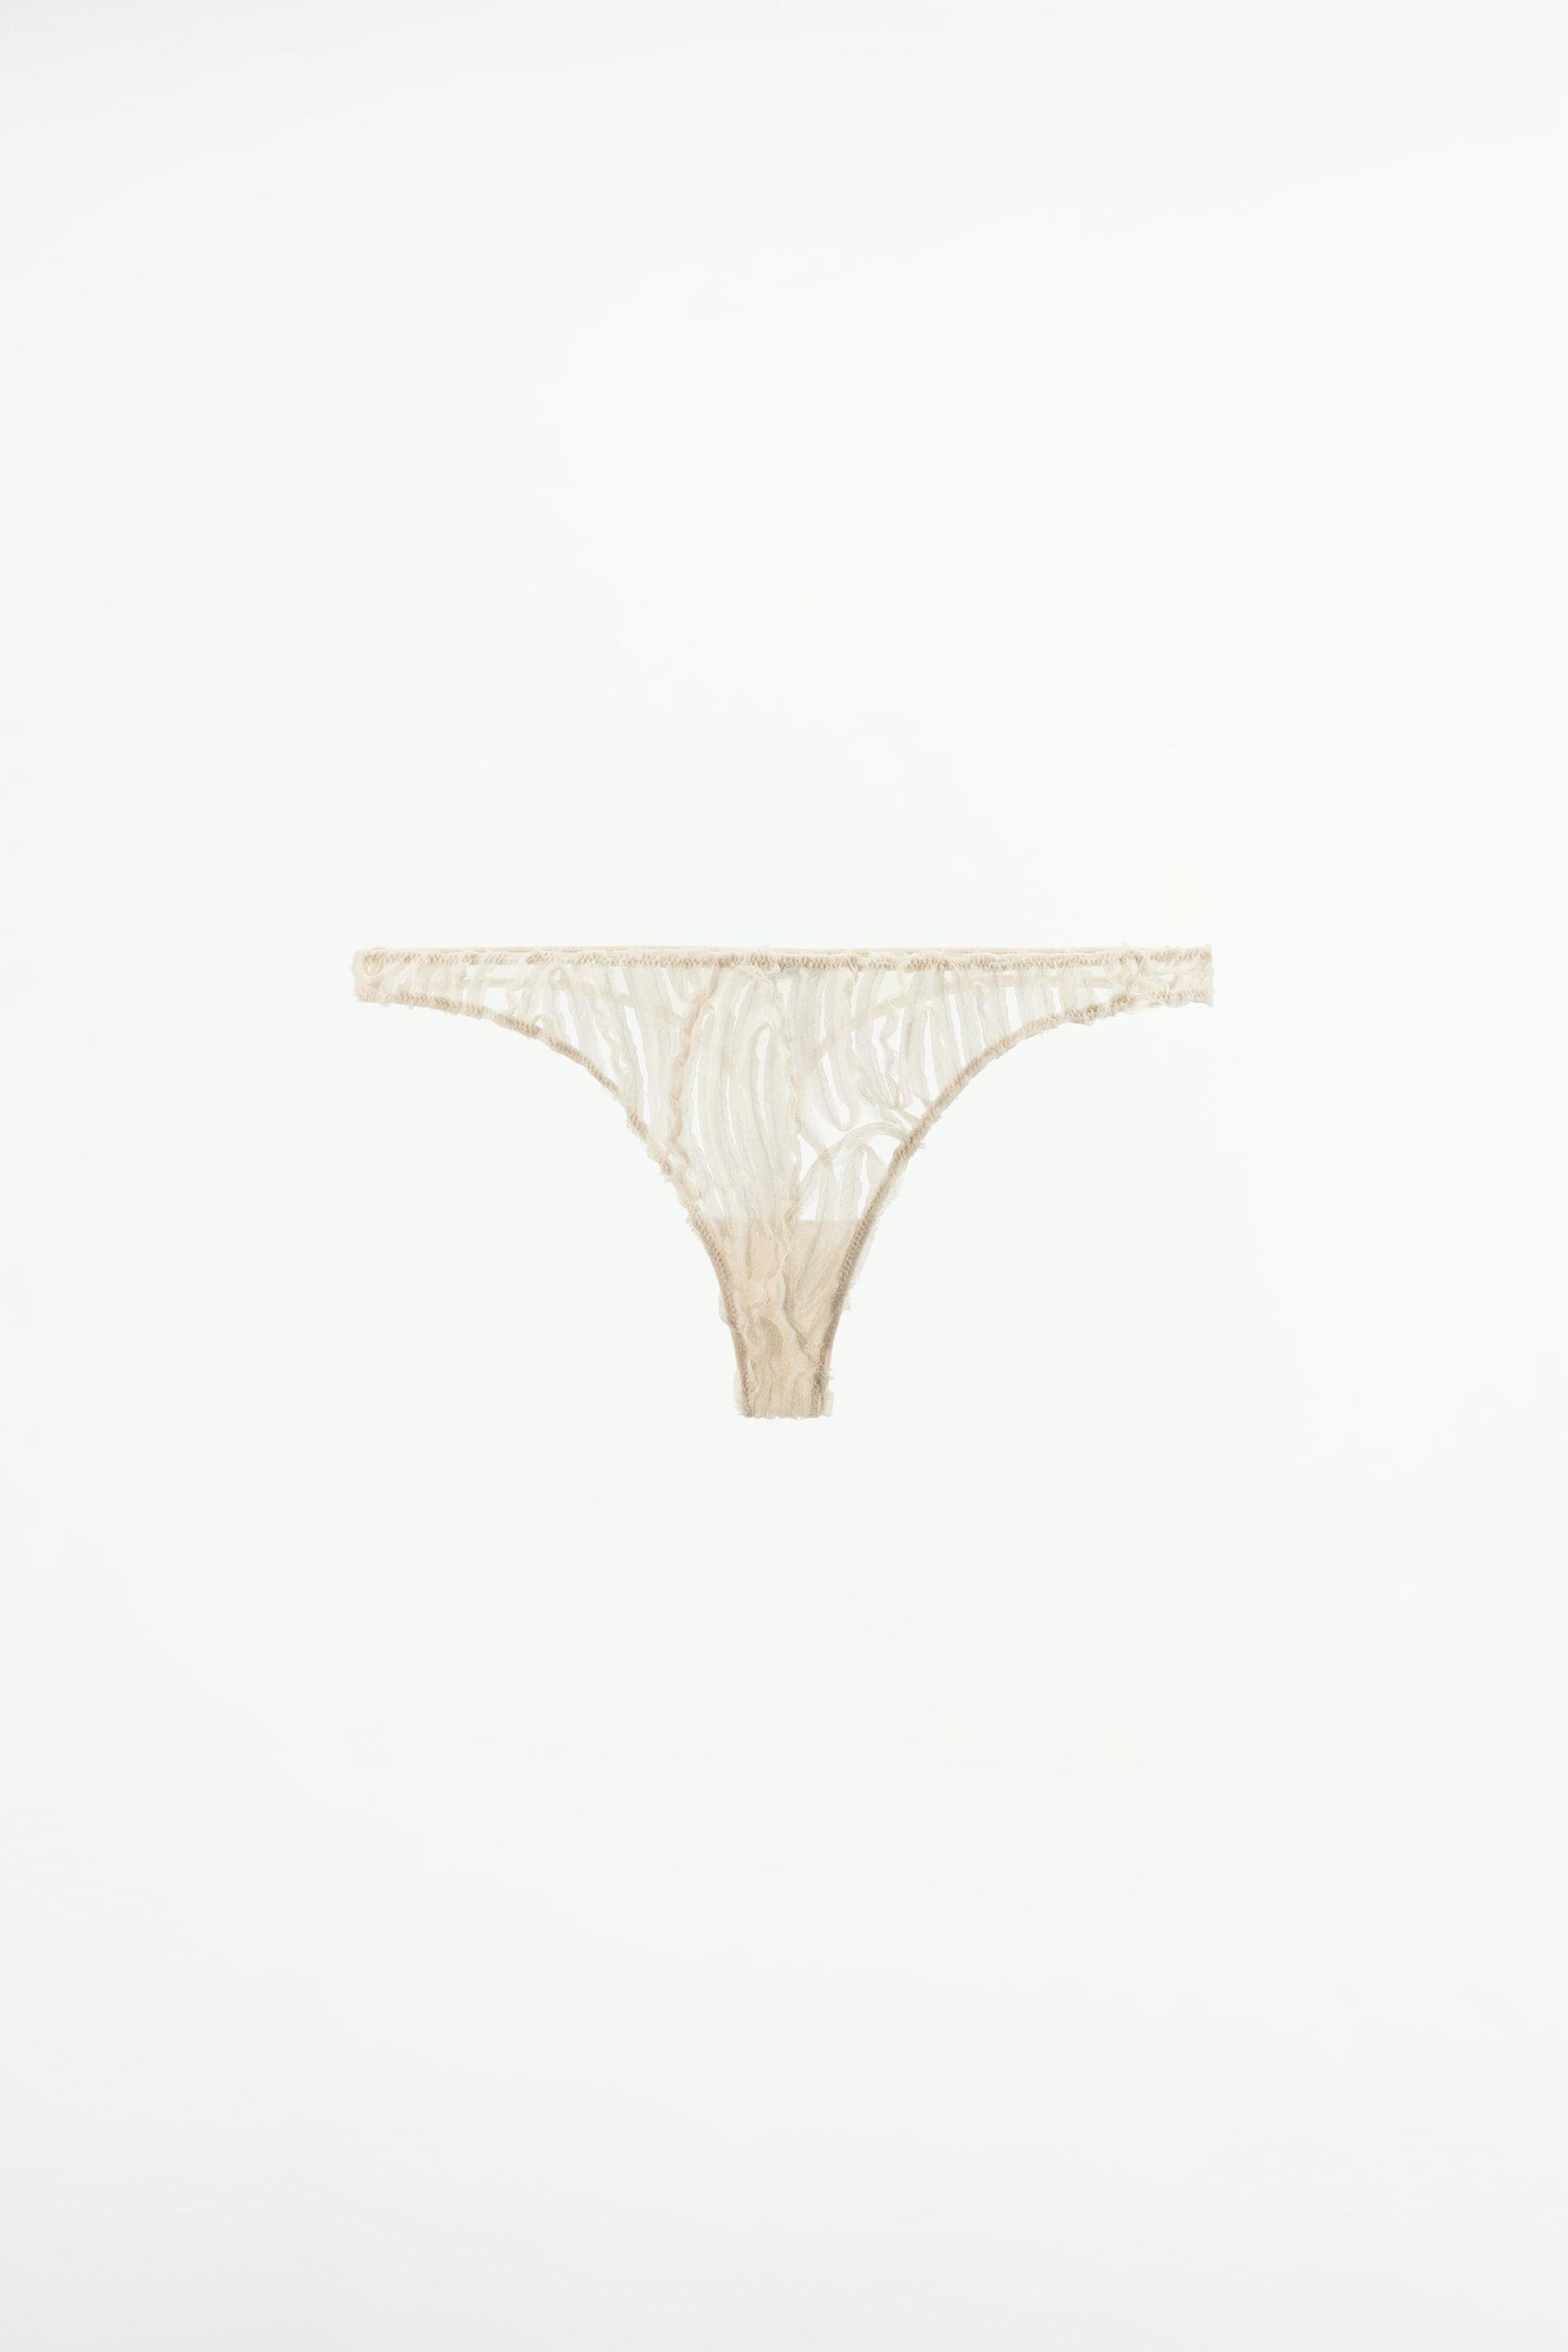 TULLE THONG by ZARA